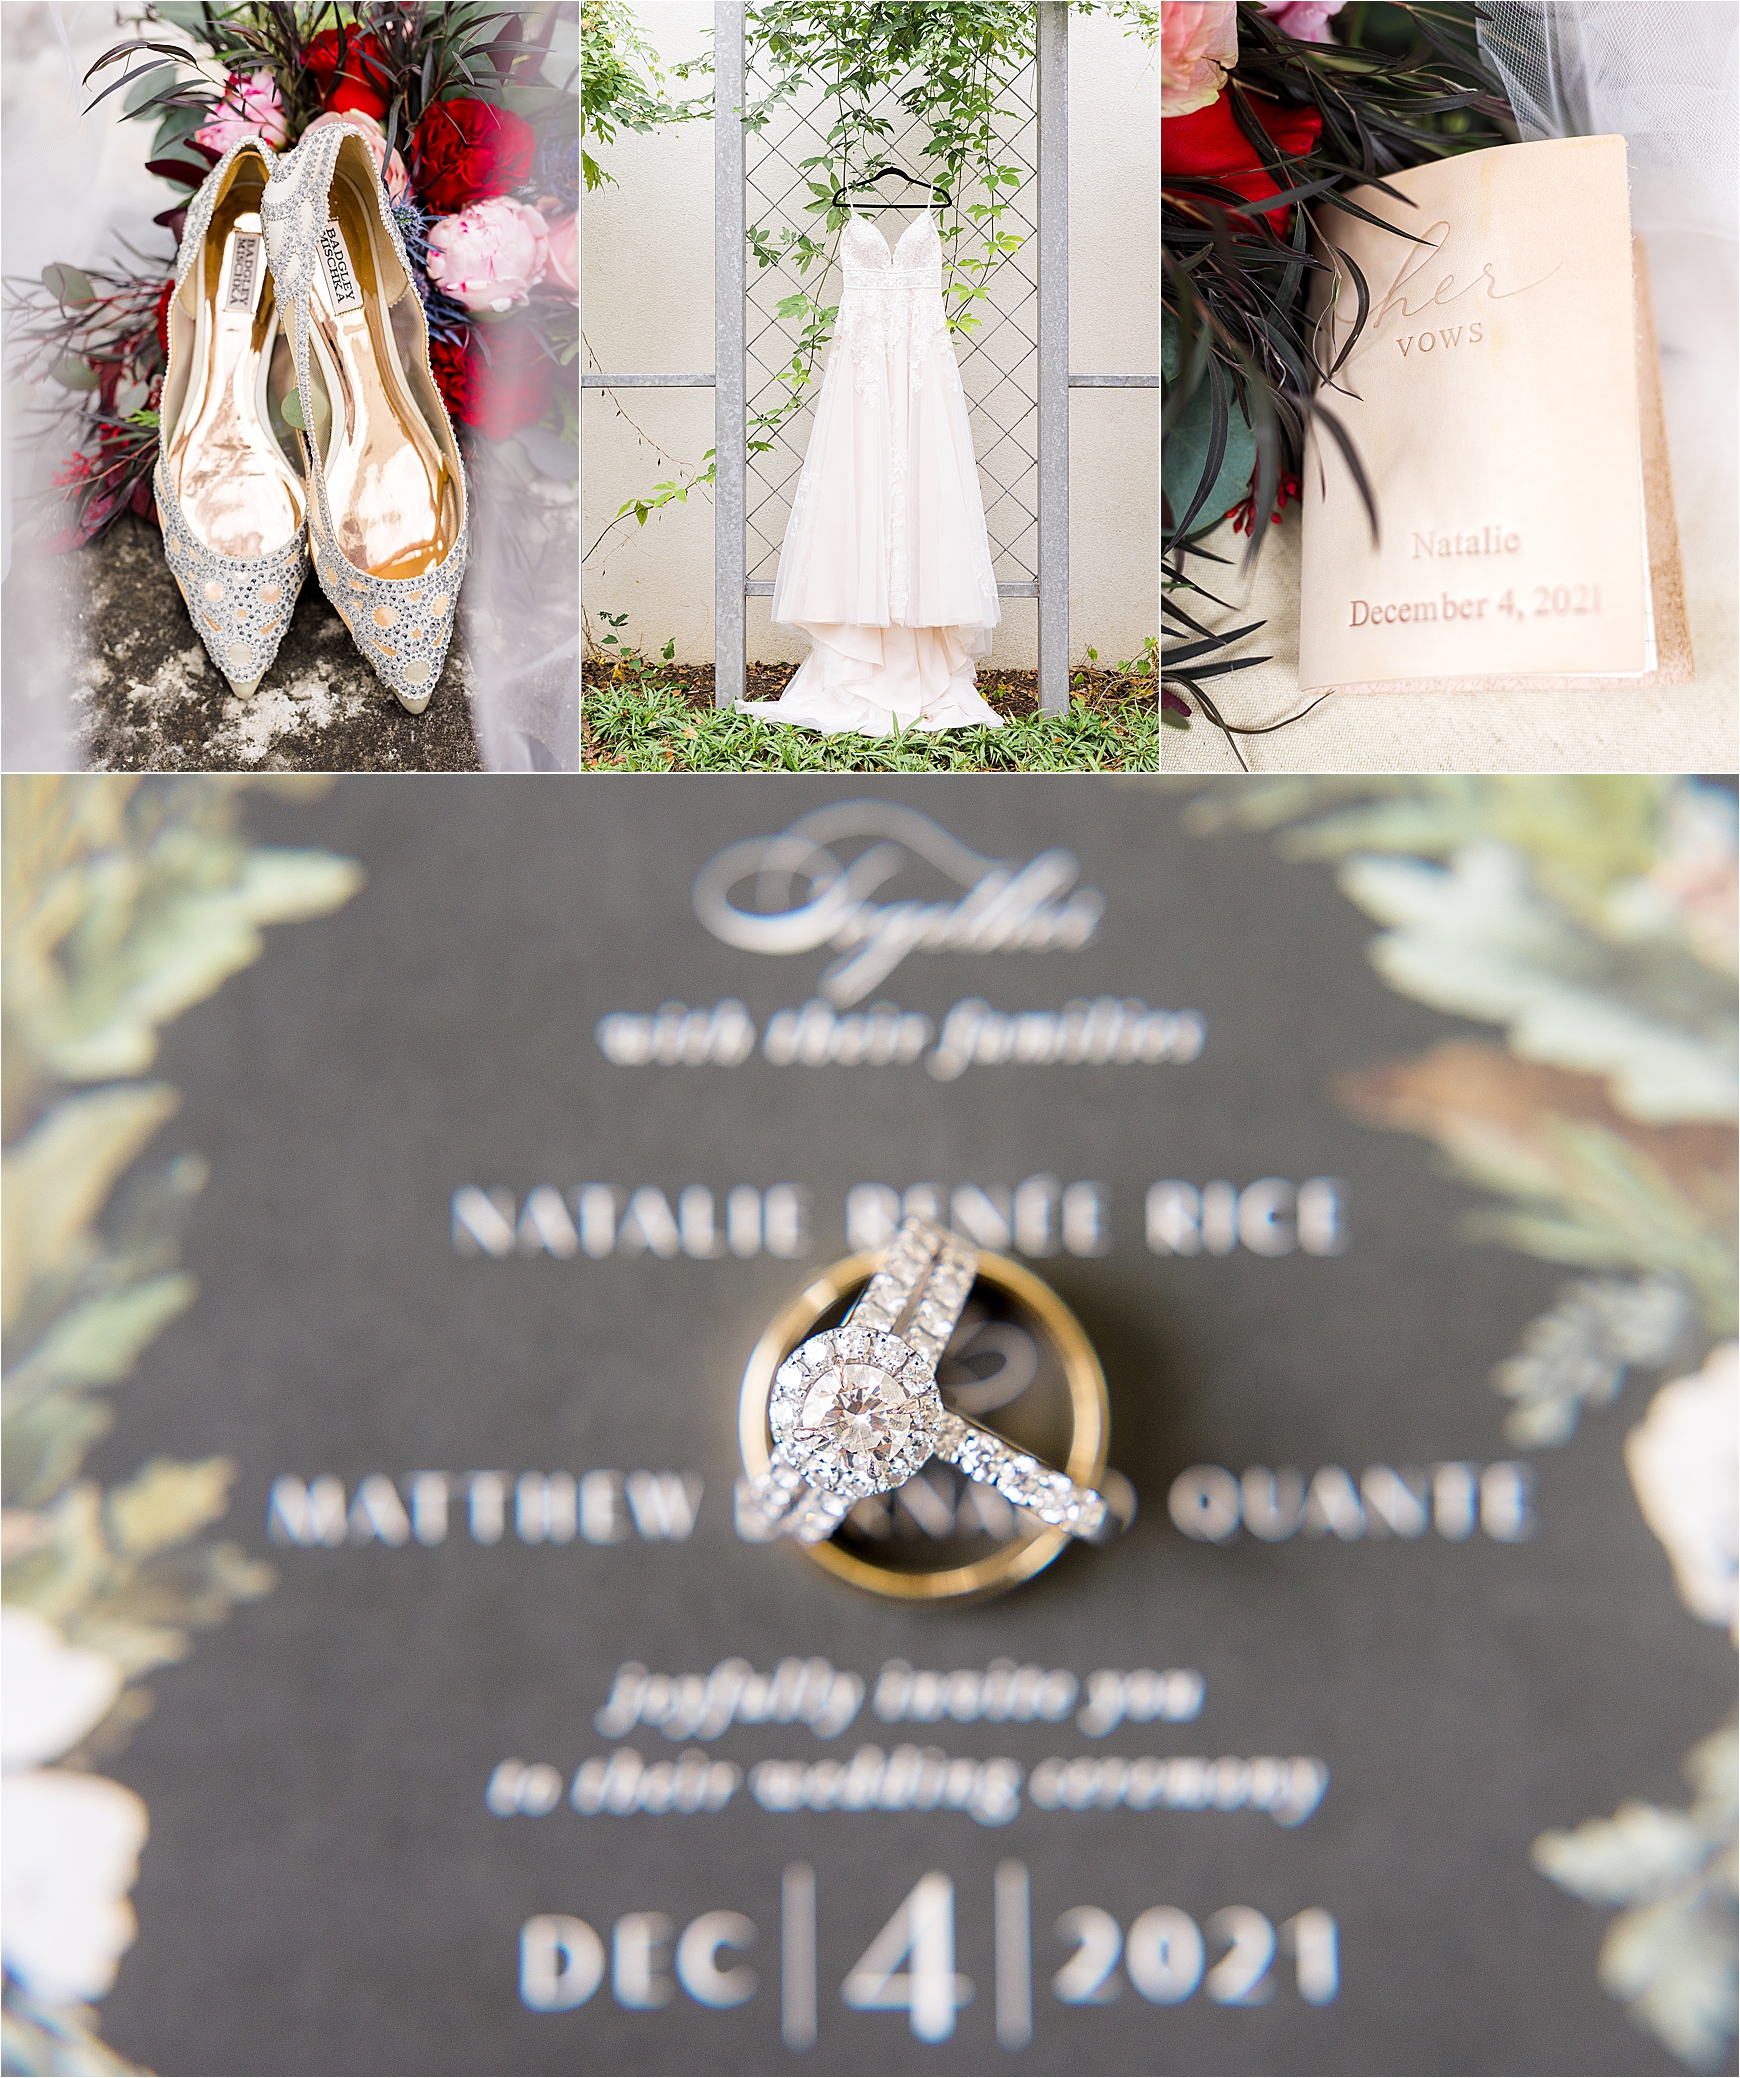 A close up of sparkly wedding flats, a dress hanging in front of vines, a vow book and wedding rings on the invitation for a San Antonio Winter Wedding 